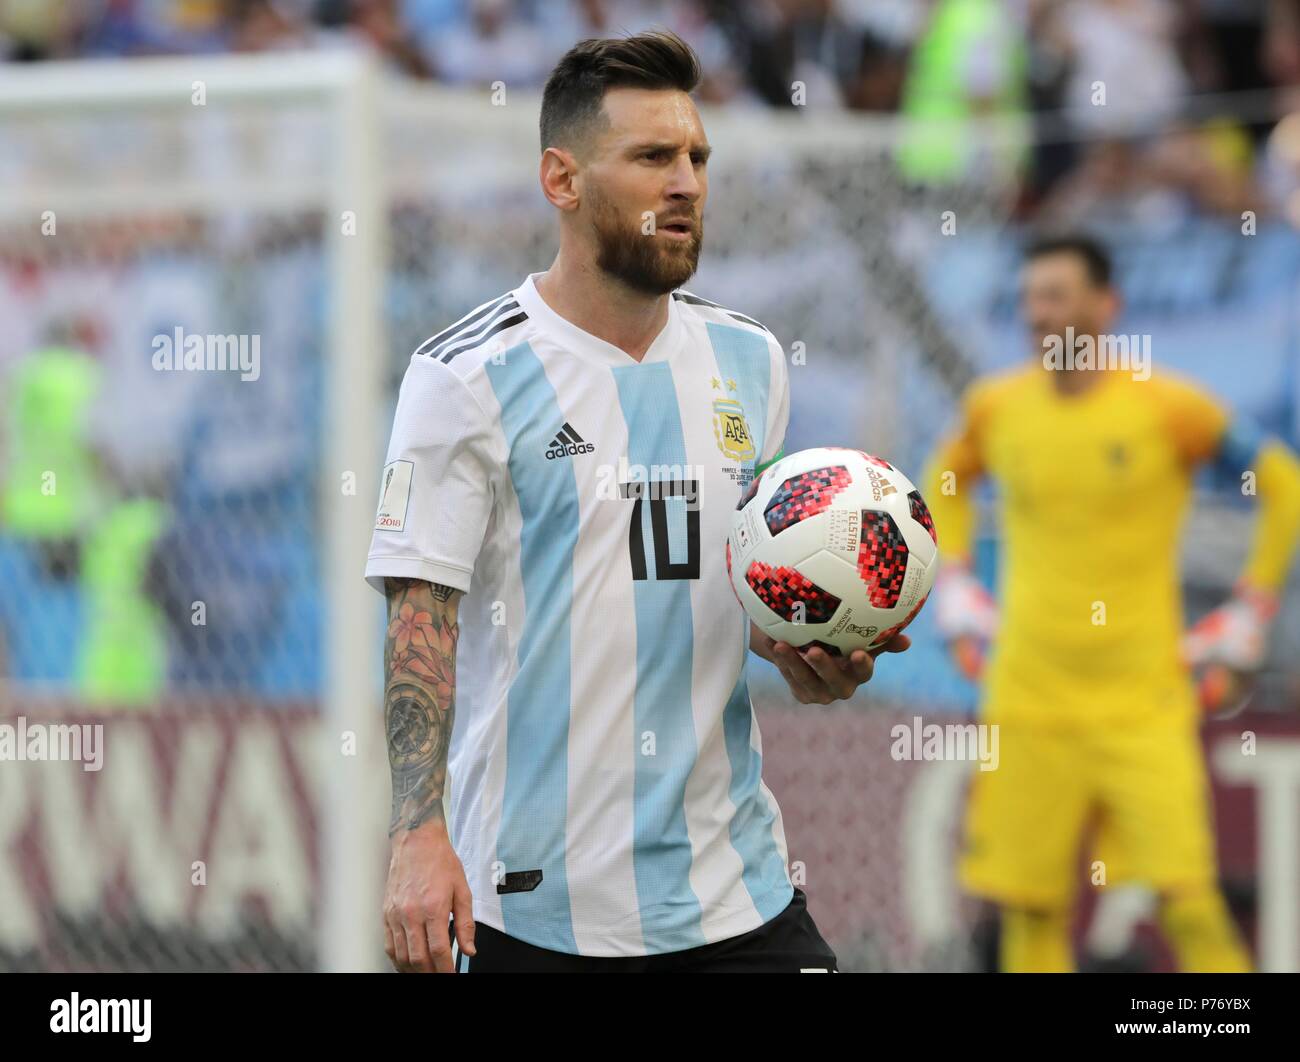 June 30, 2018. - Russia, Kazan. - 2018 FIFA World Cup round of 16 match. France v Argentina, 4:3. In picture: Argentina's player Lionel Messi (10). Stock Photo